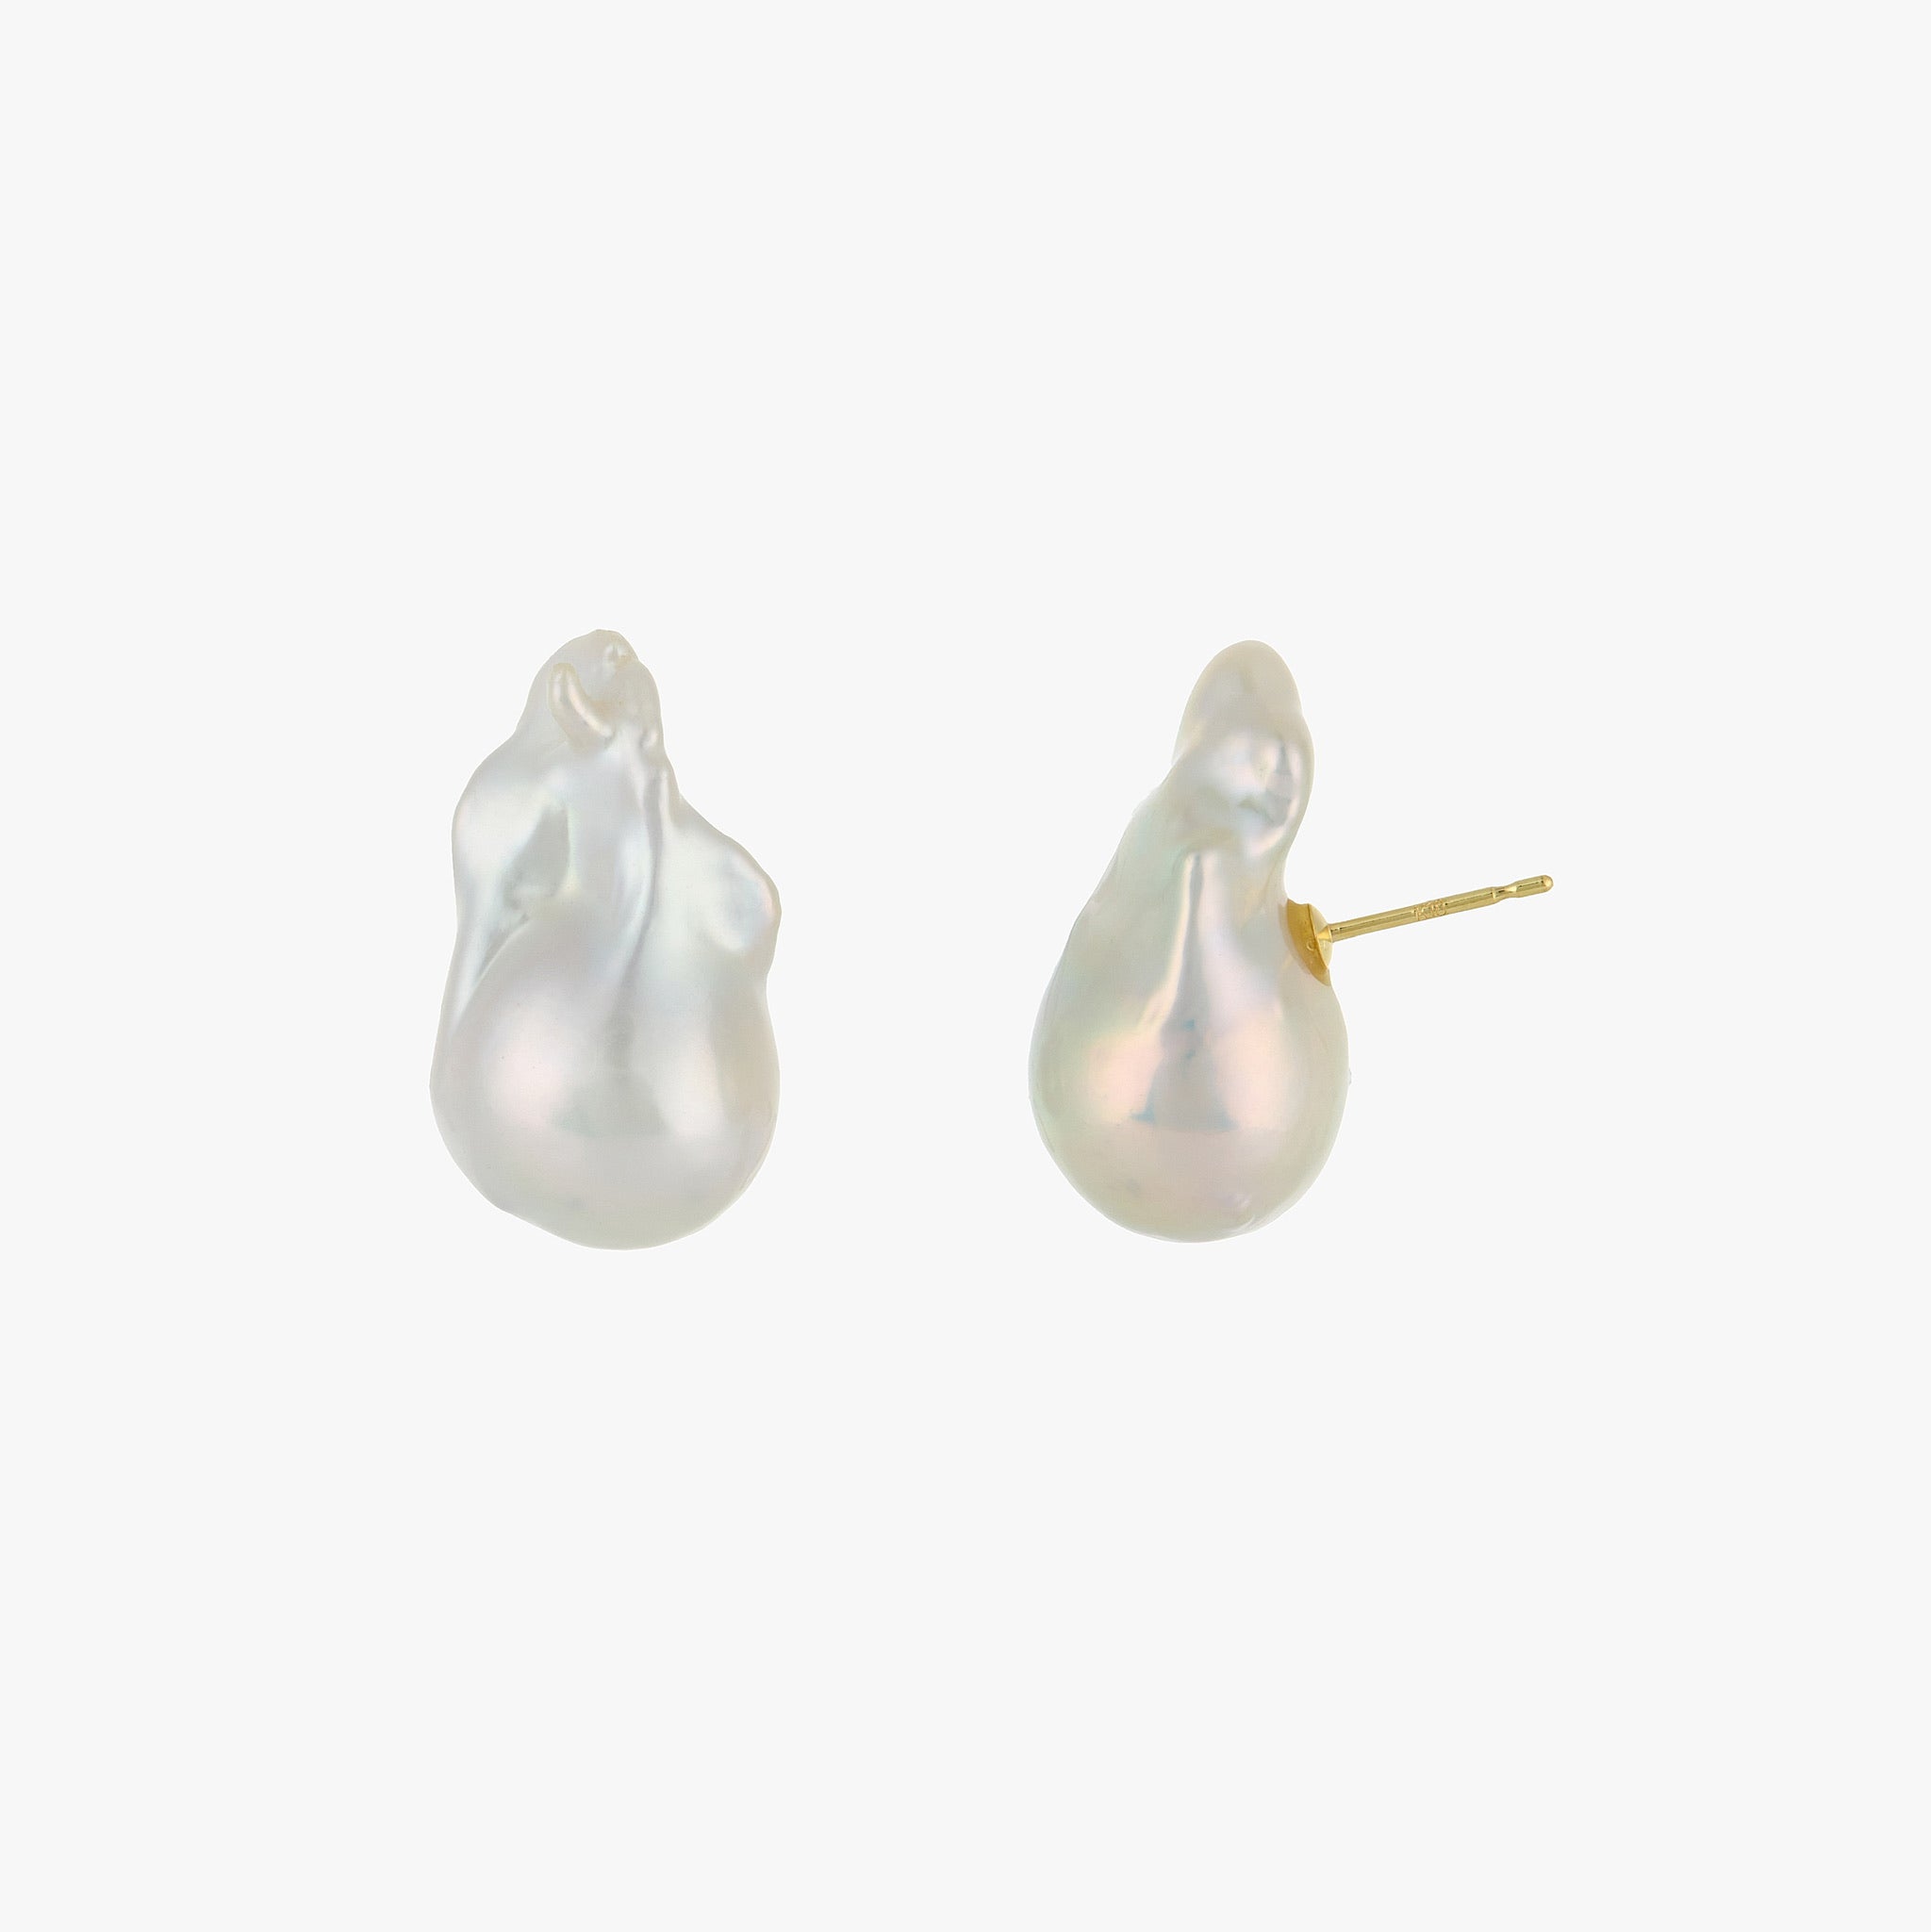 Showcase of Baroque Pearl Stud Earrings on white background